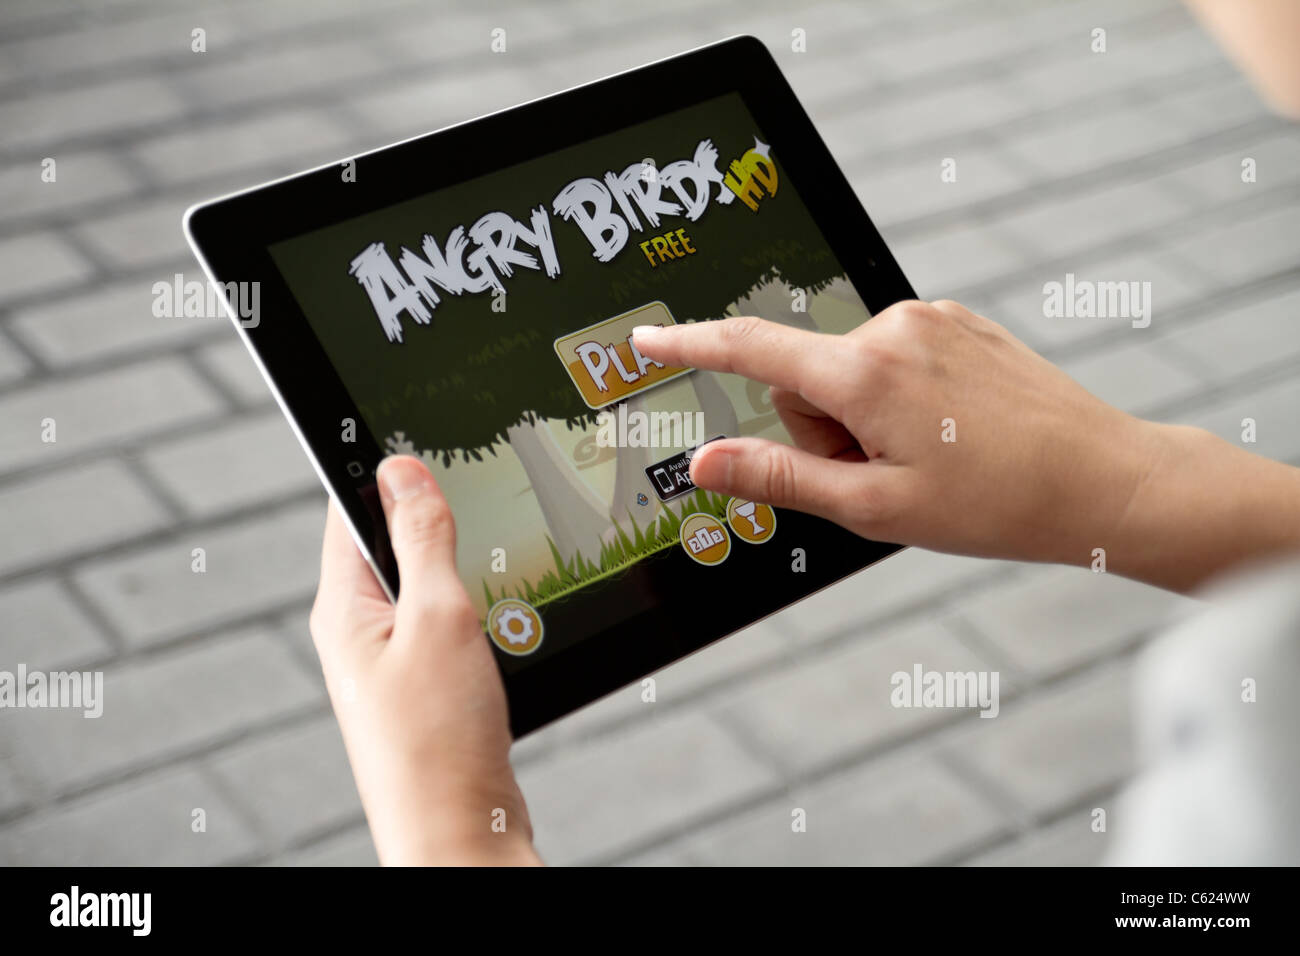 greenscreen old tablet games have my heart 💞 #old games#angrybirds#